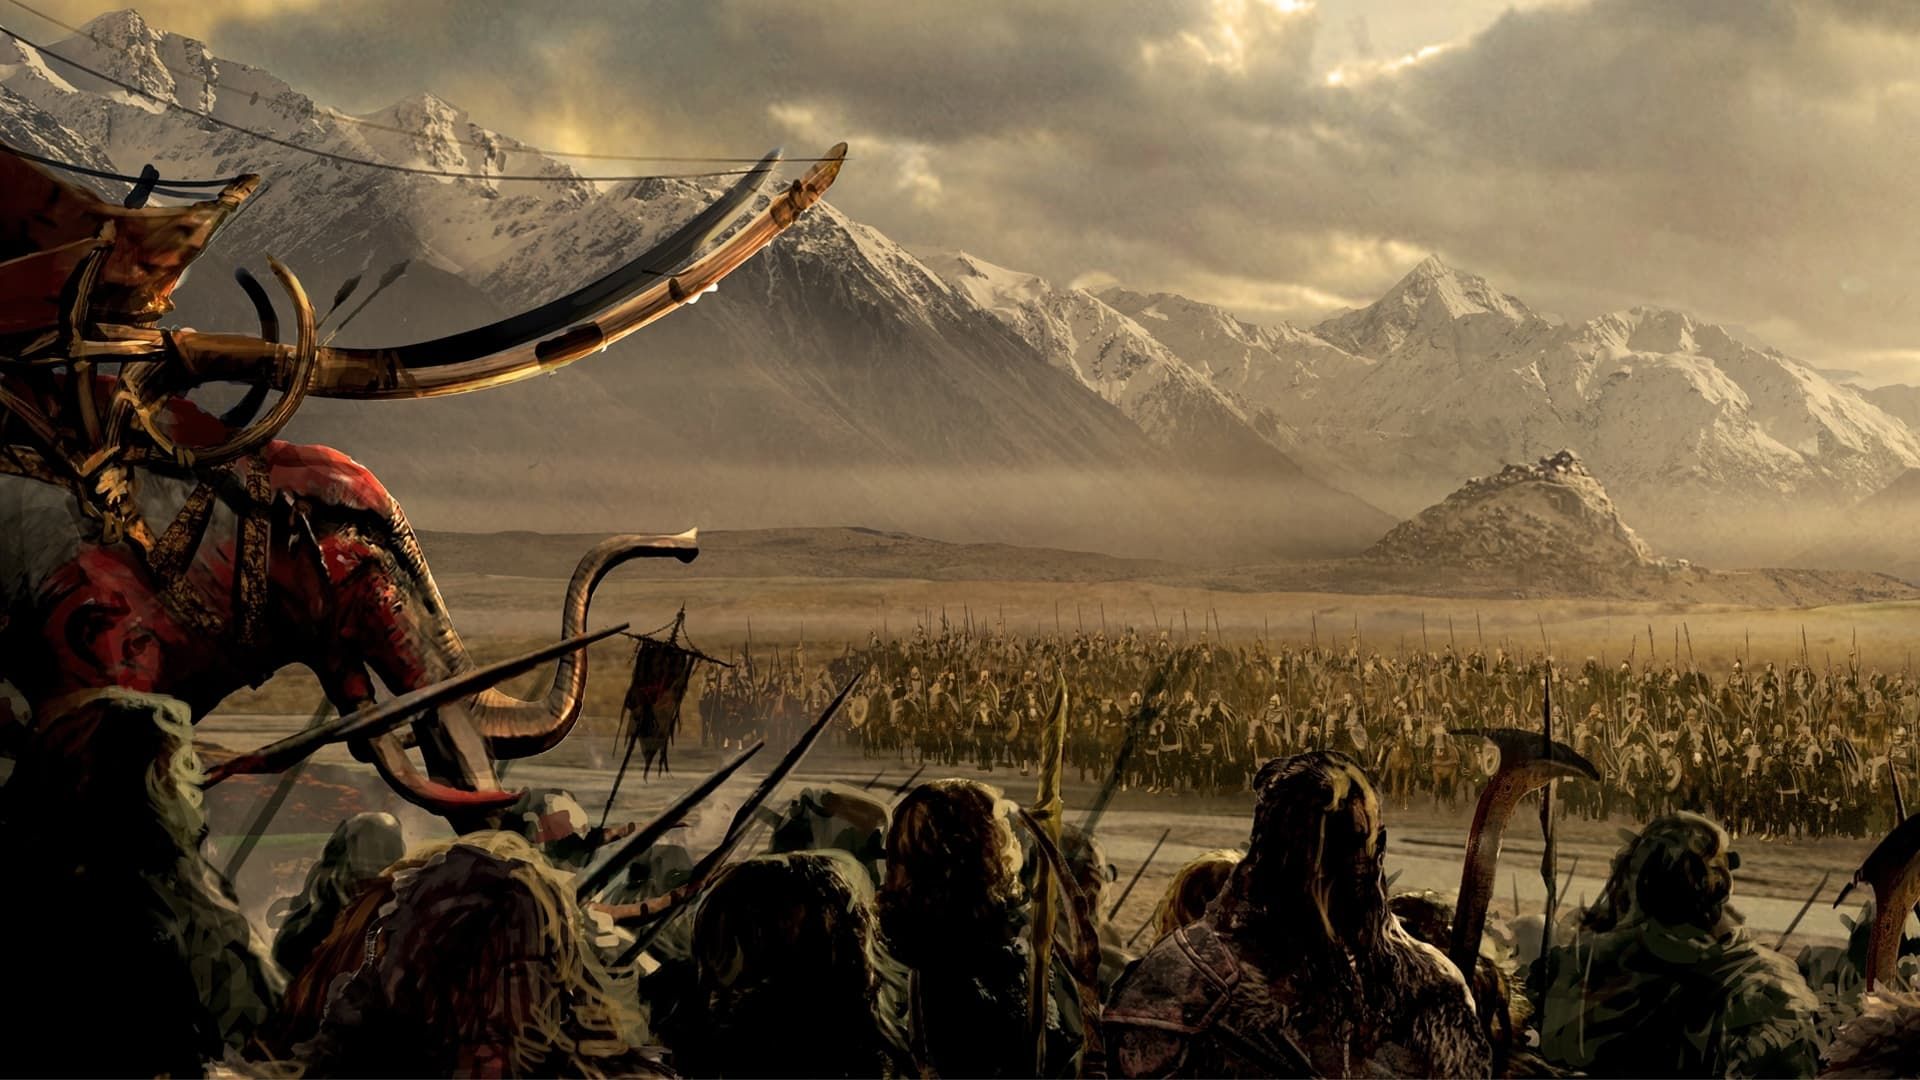 The Lord of the Rings: The War of the Rohirrim background